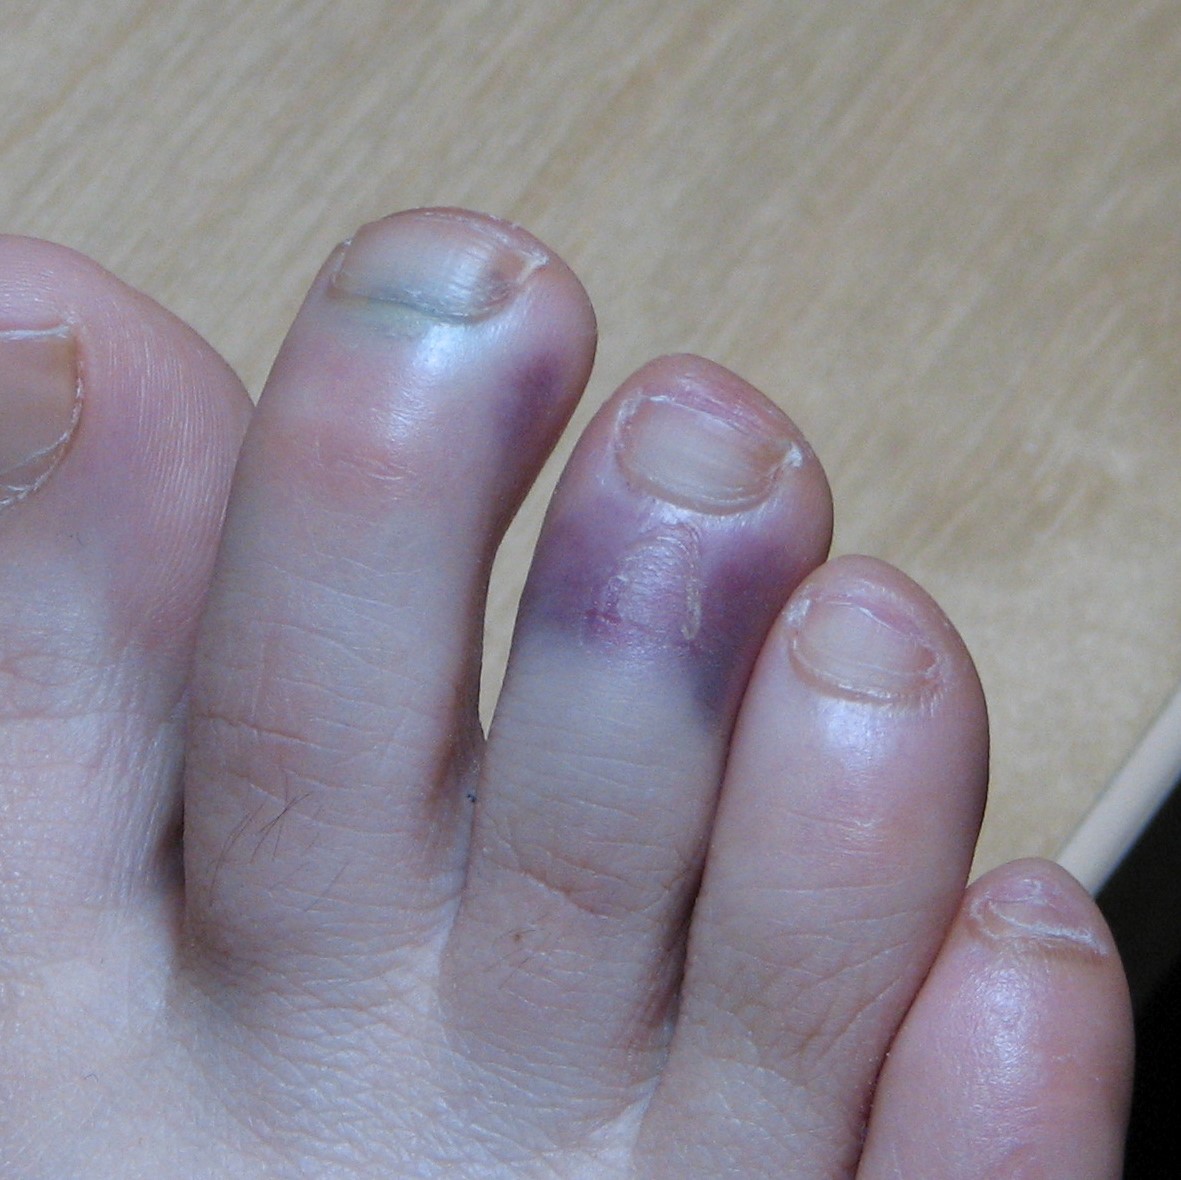 Covid toes that turn purple from the disease can last for FIVE MONTHS